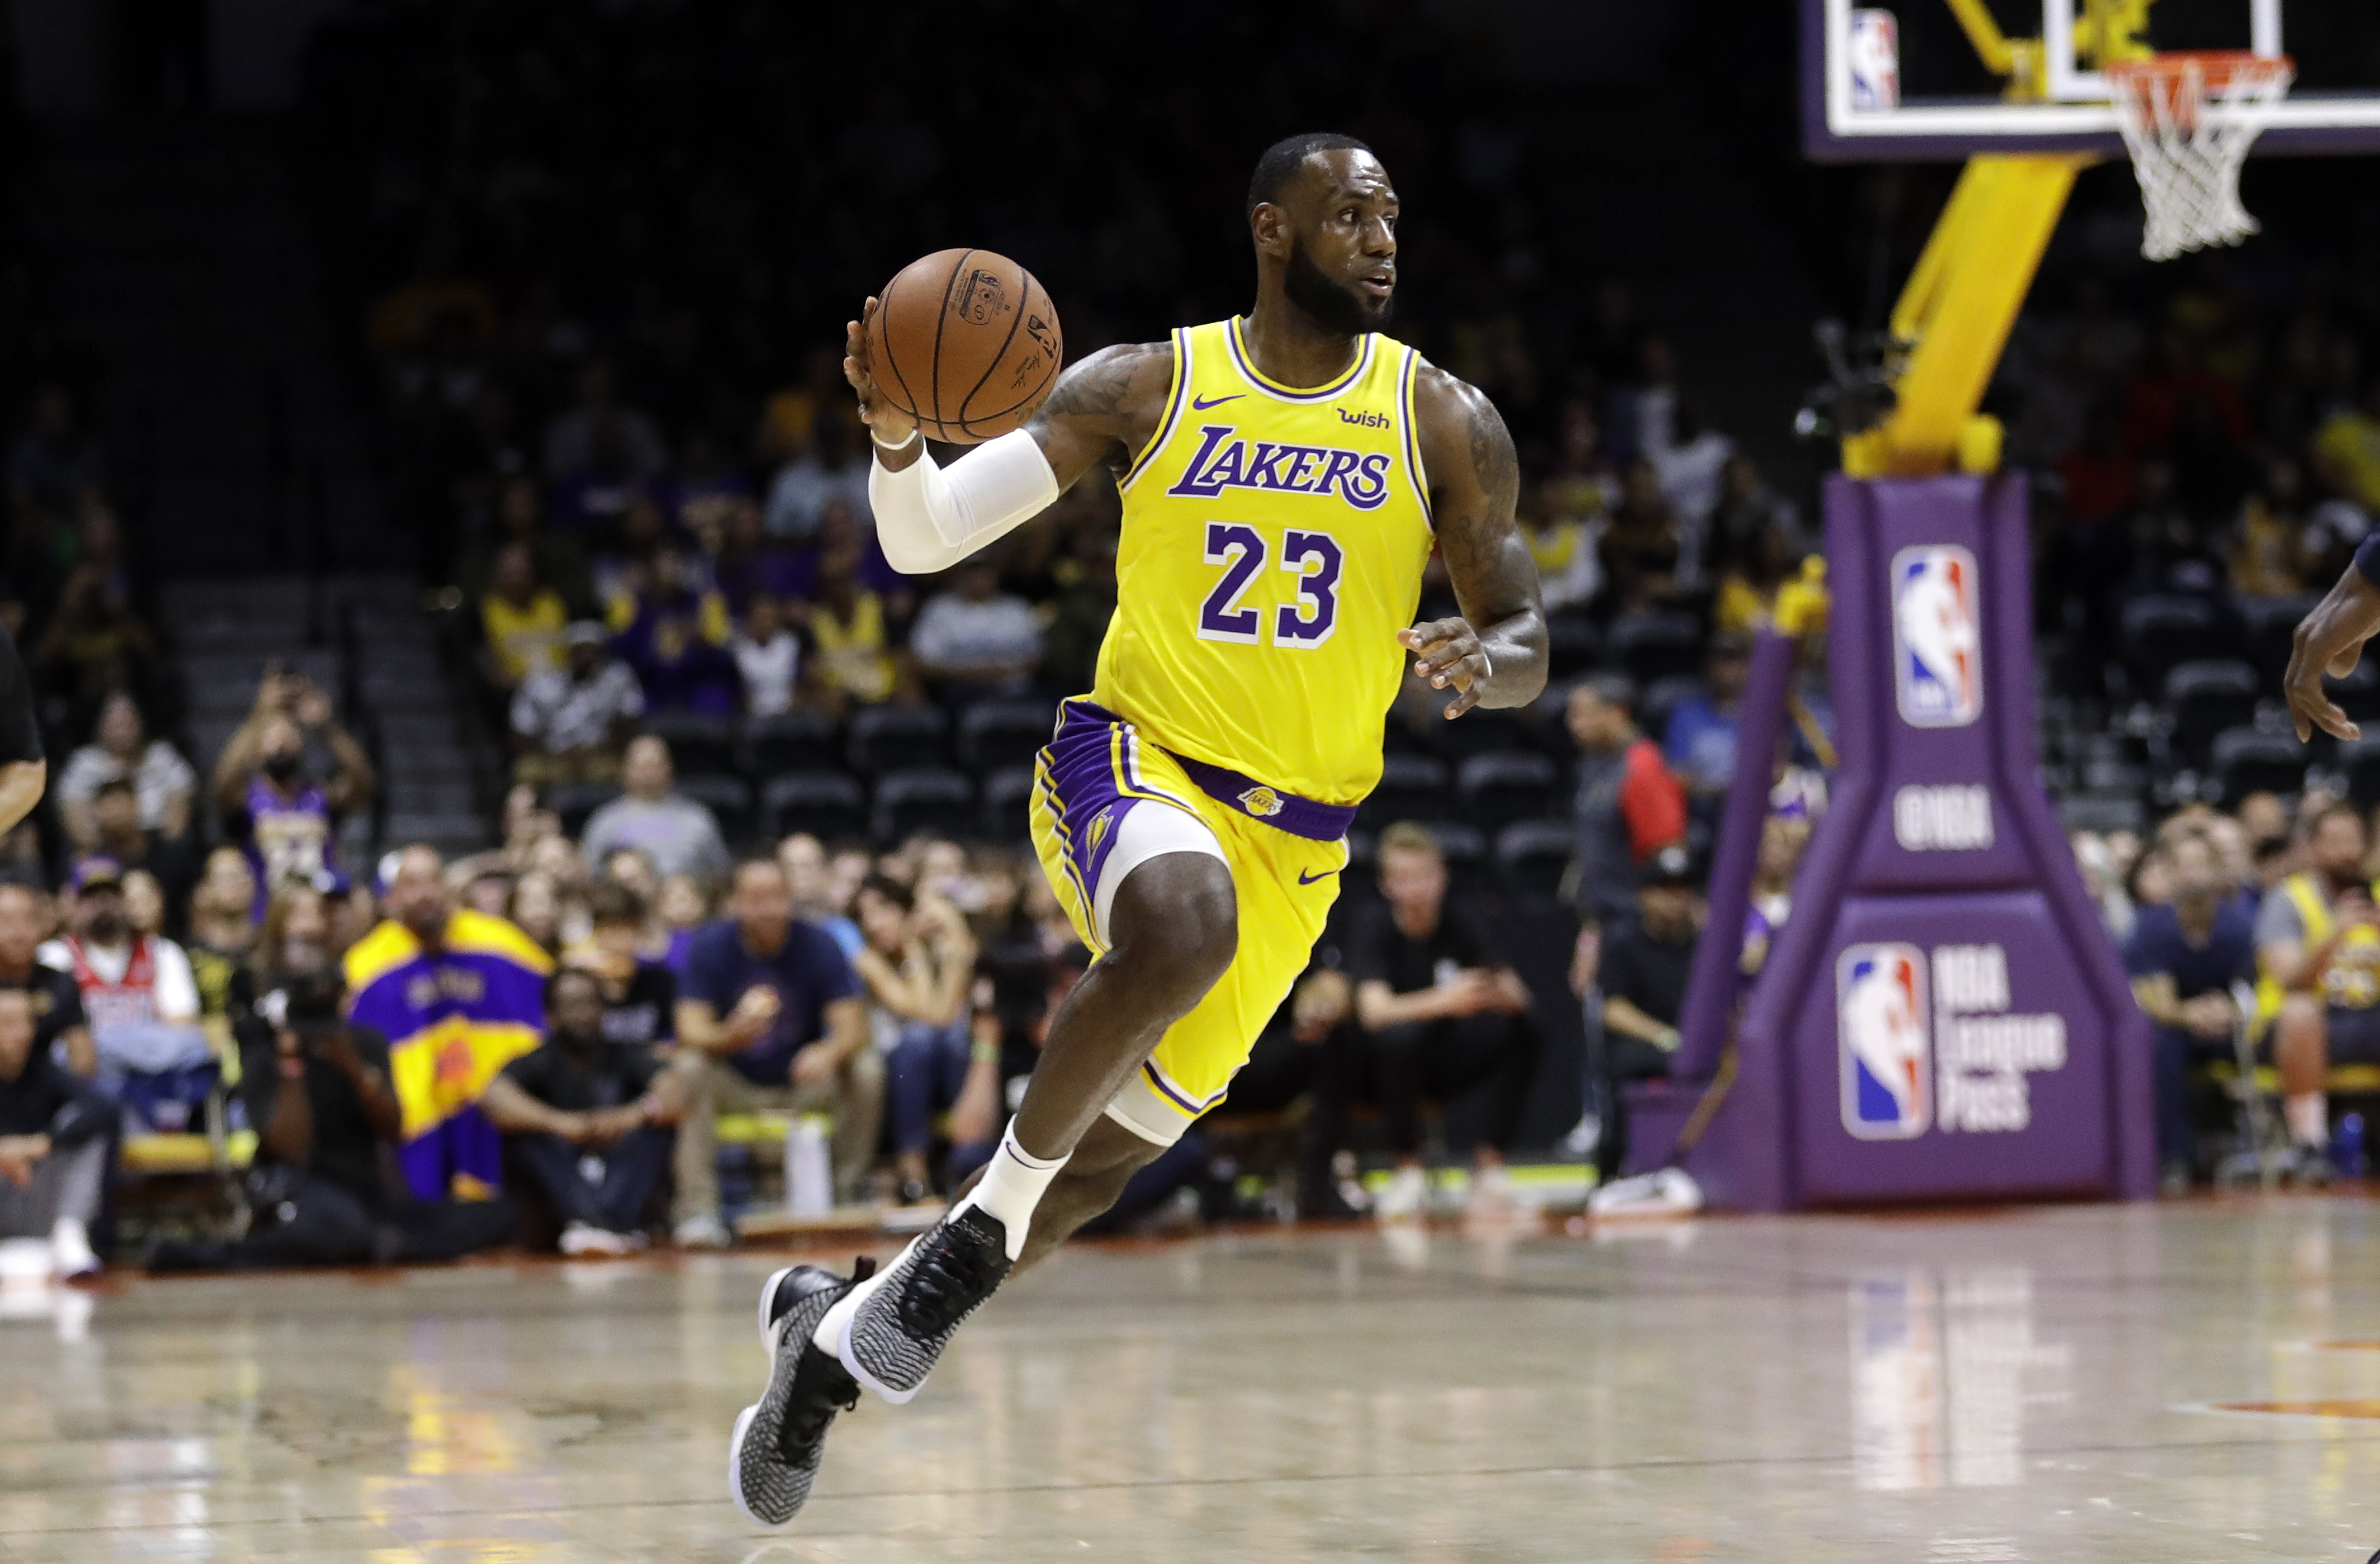 James captivates crowd in his Los Angeles Lakers debut